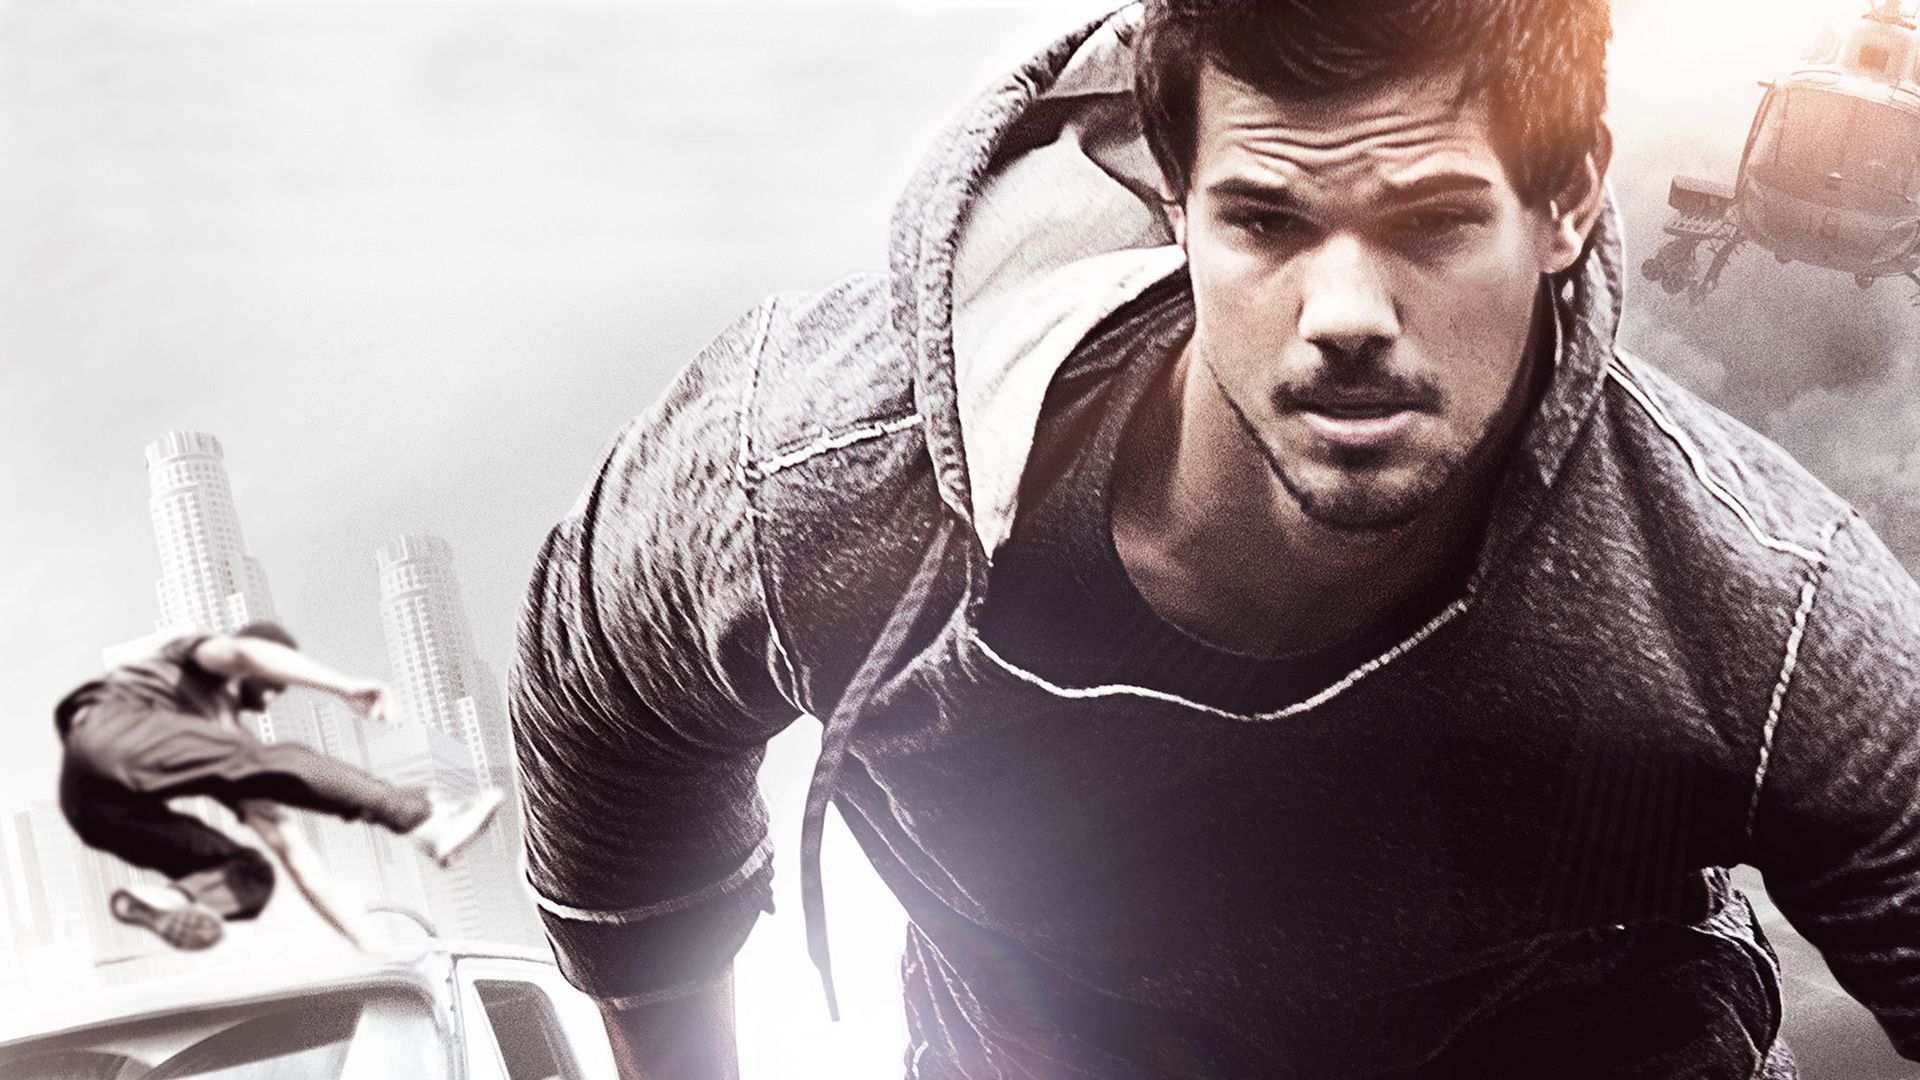 Tracers background